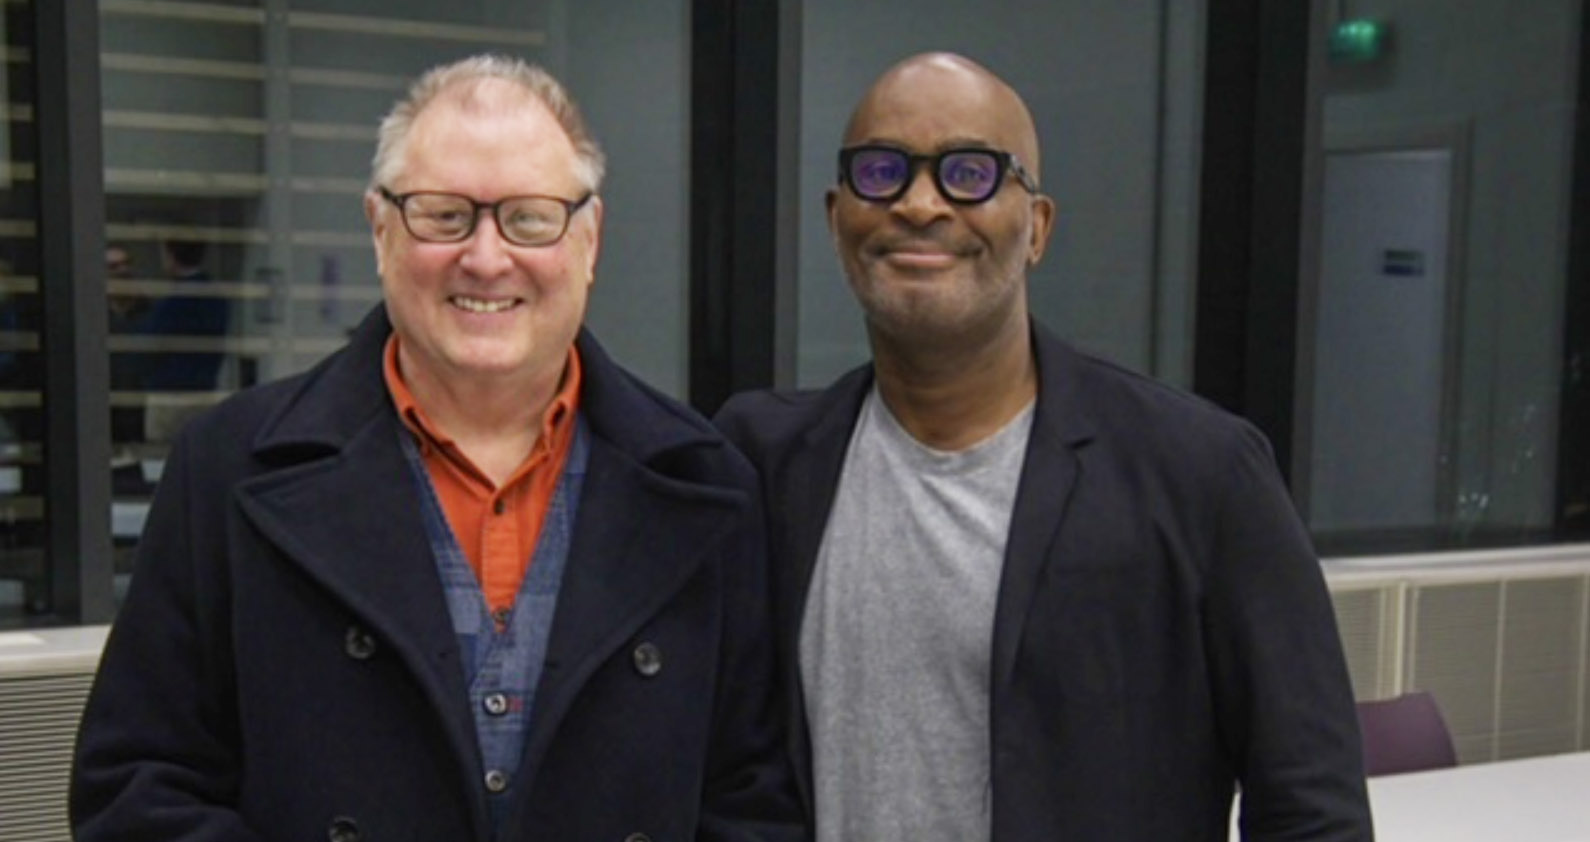 Climate scientist Professor Bill McGuire and Professor Robert Beckford, Director of the University of Winchester Institute for Climate and Social Justice